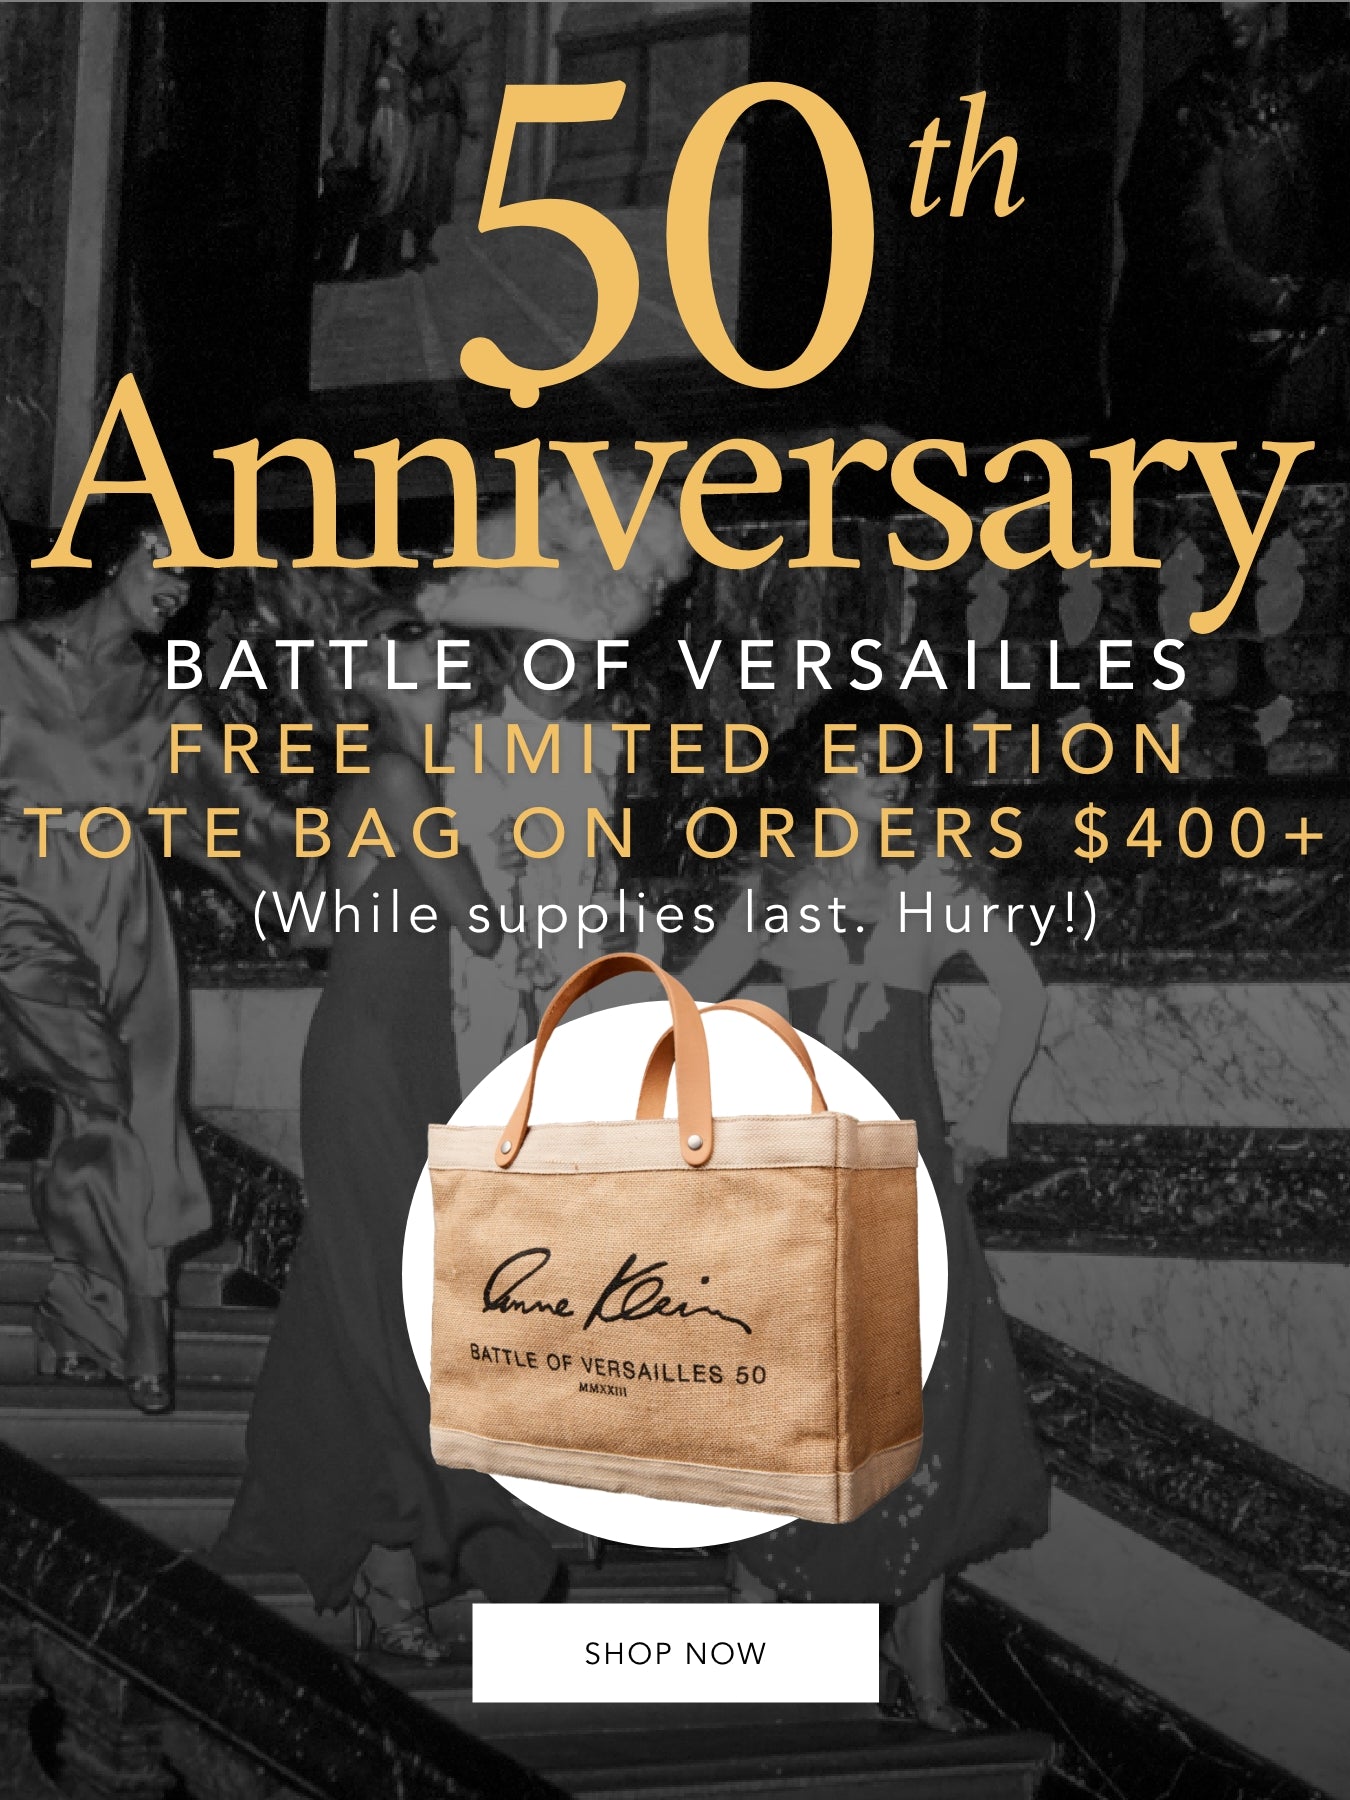 50th anniversary battle of versilles free limited edtion tote bag on orders $400+ image of tote bag bag and people at the battle of versailles